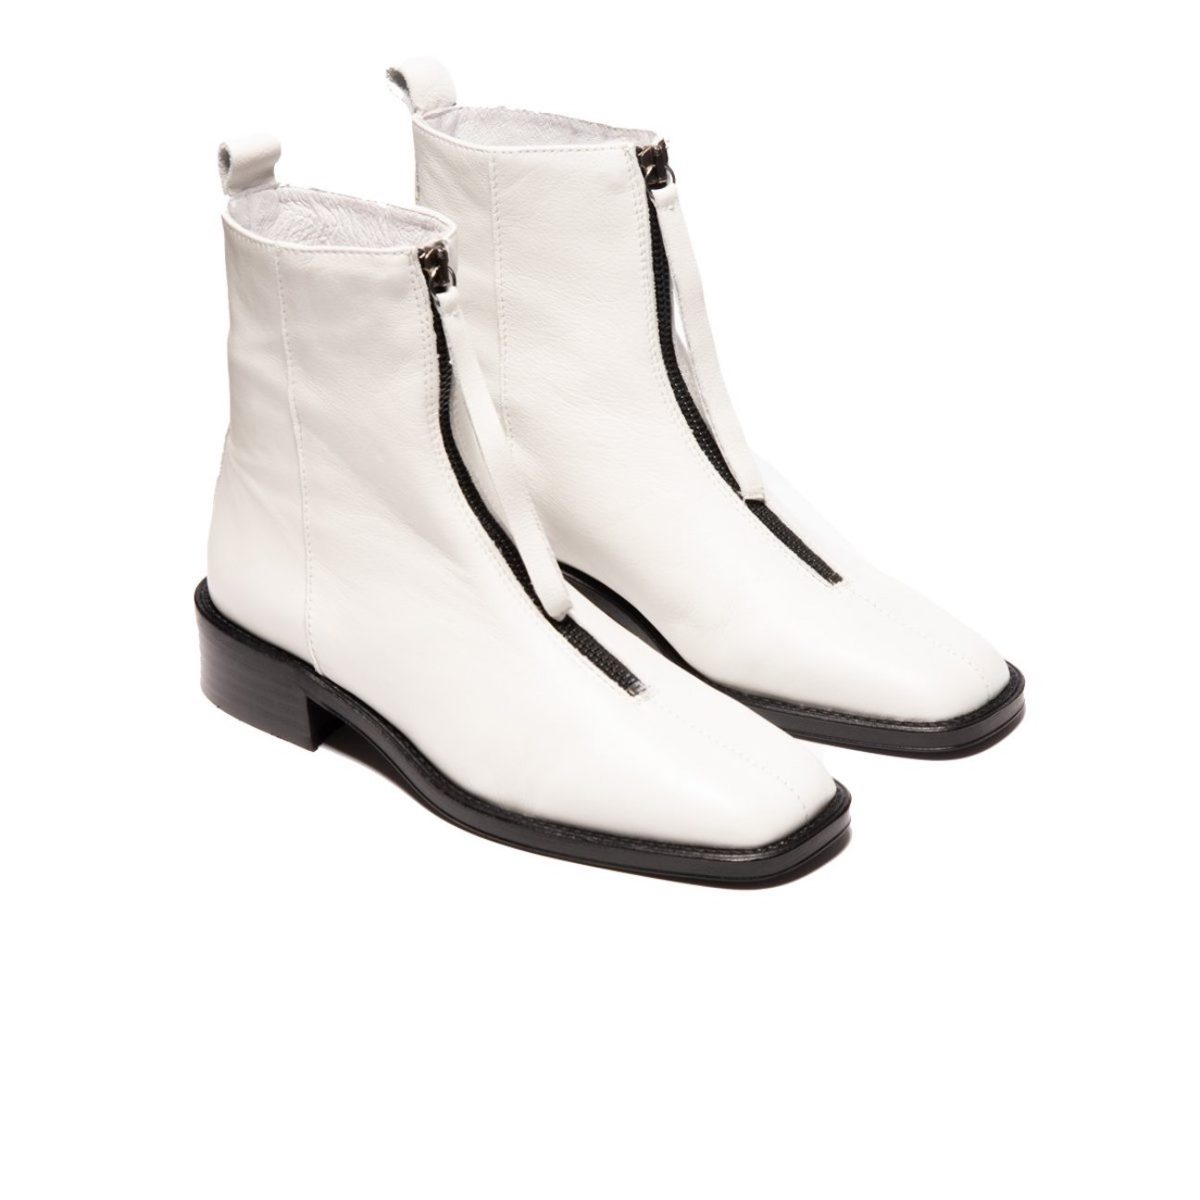 white leather boots with a zipper at the front